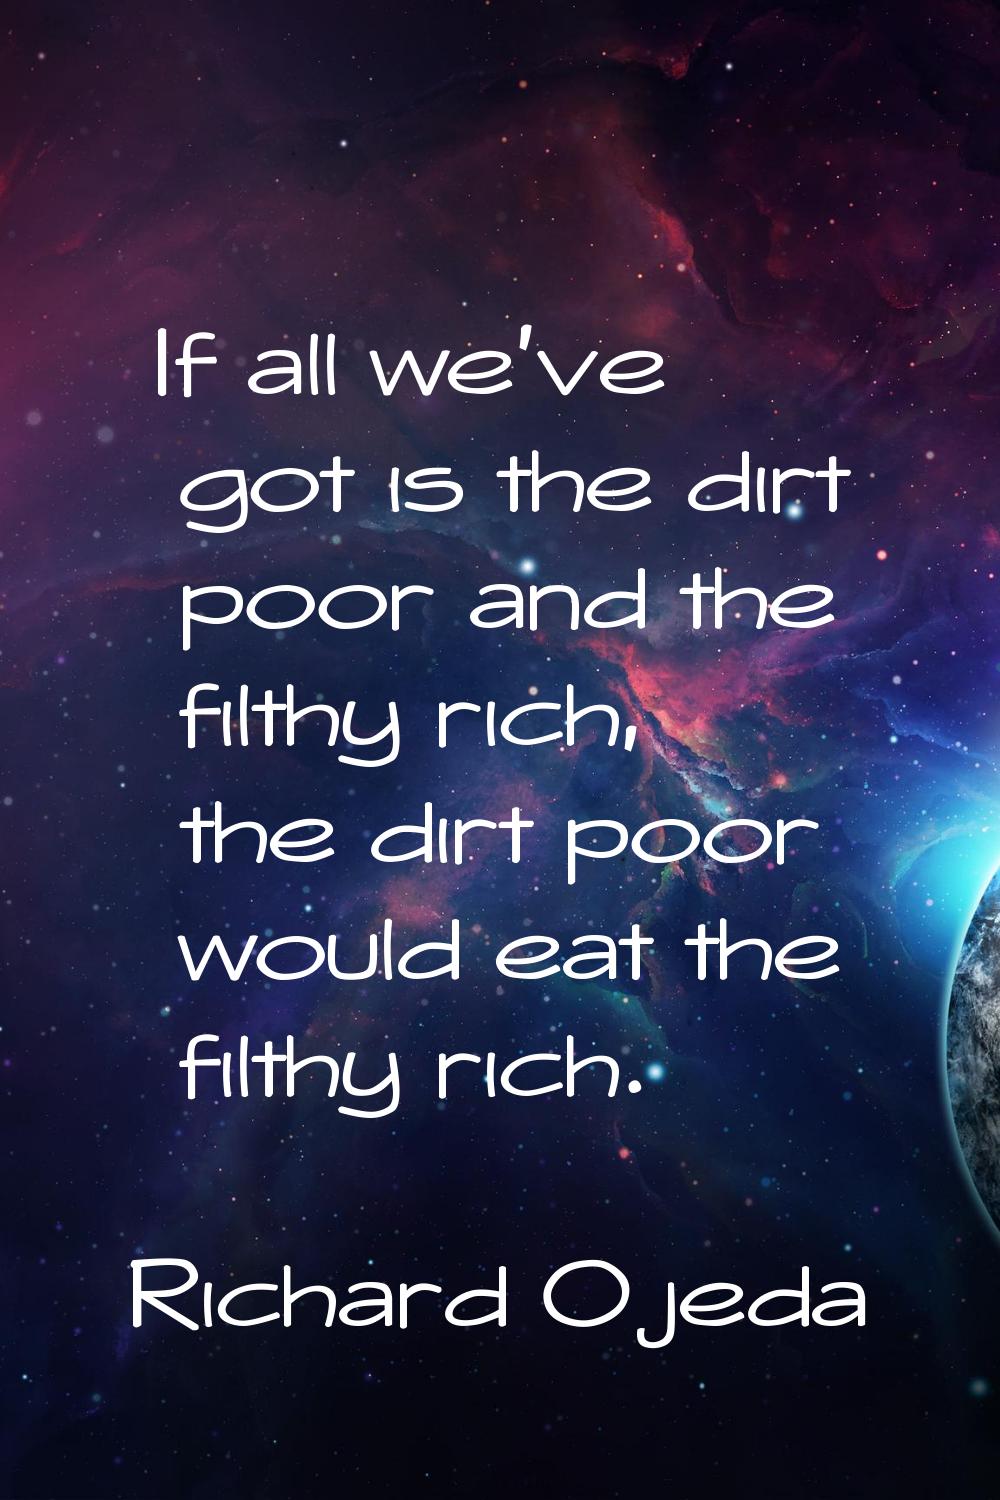 If all we've got is the dirt poor and the filthy rich, the dirt poor would eat the filthy rich.